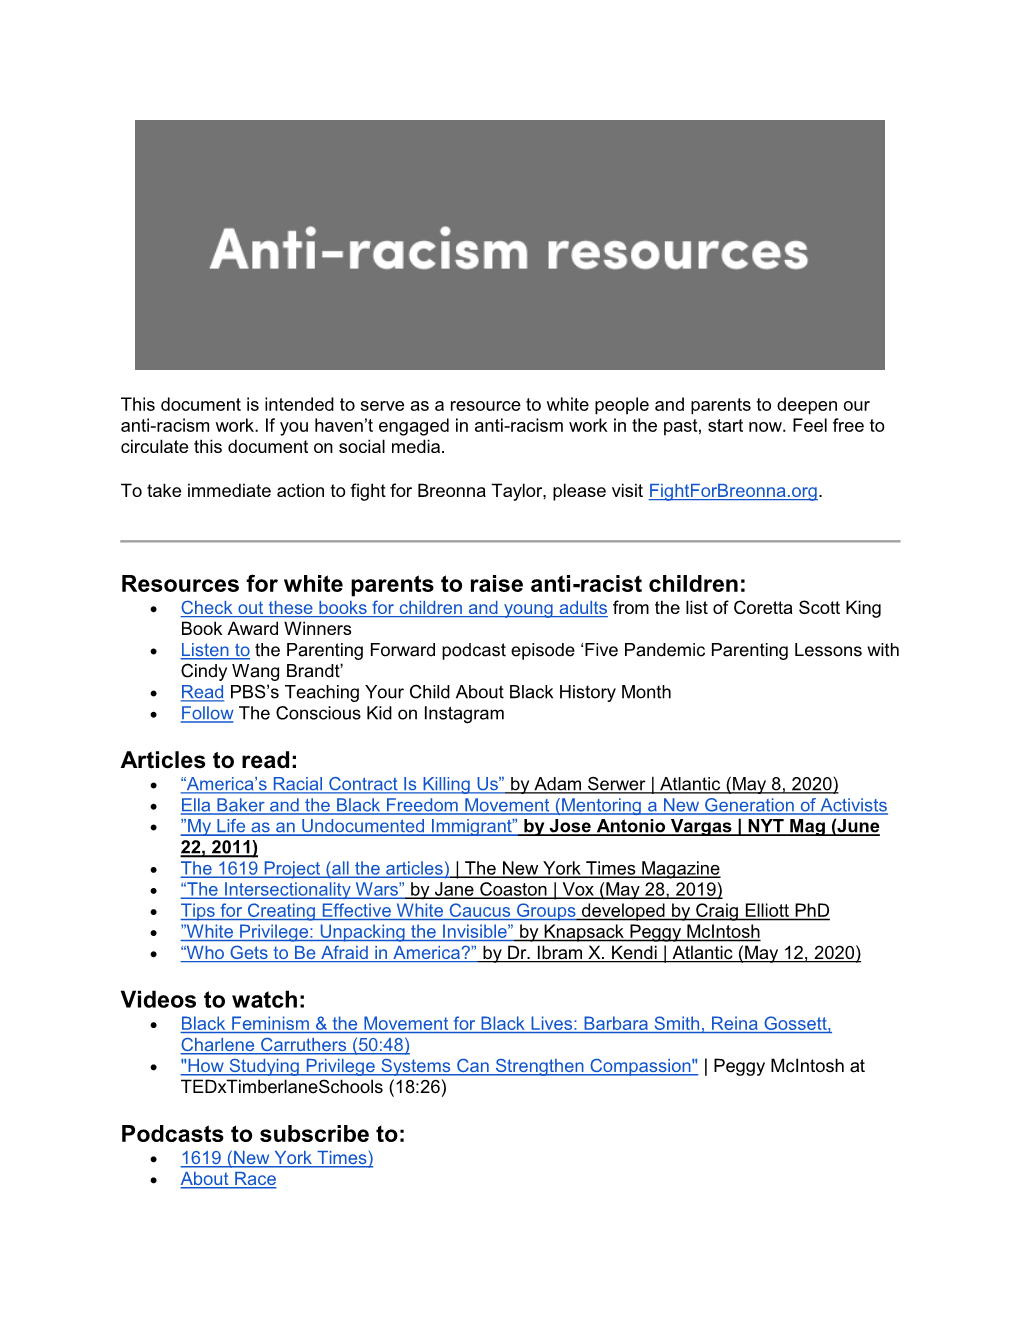 Resources for White Parents to Raise Anti-Racist Children: Articles to Read